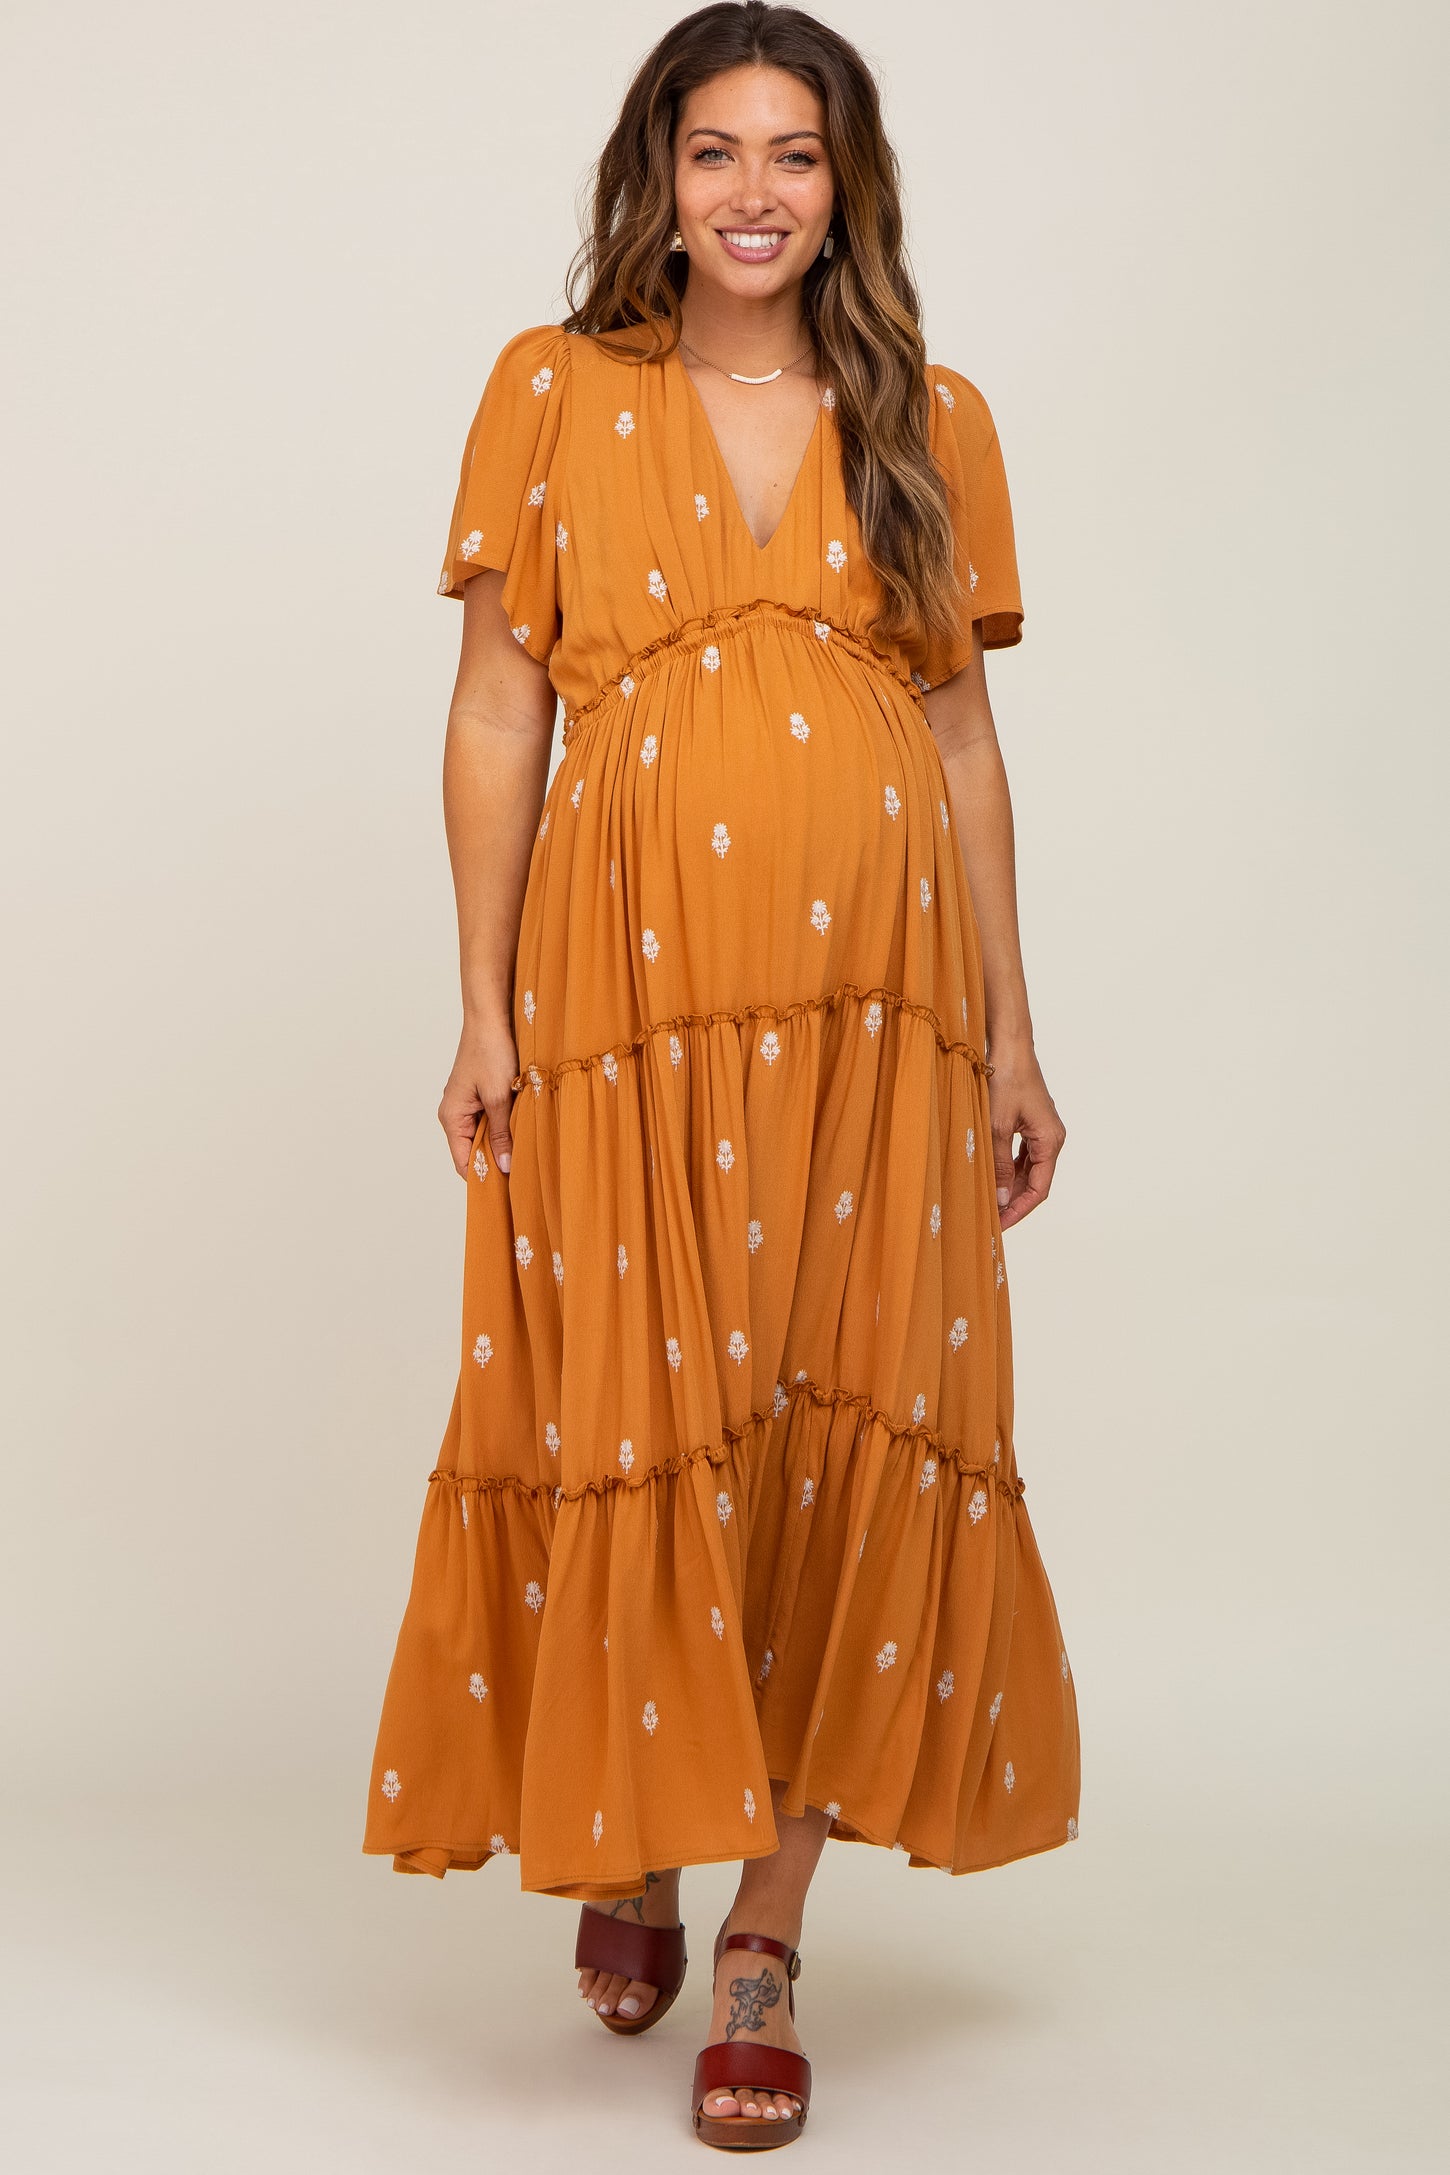 Camel Floral Embroidered Tiered Maternity Maxi Dress